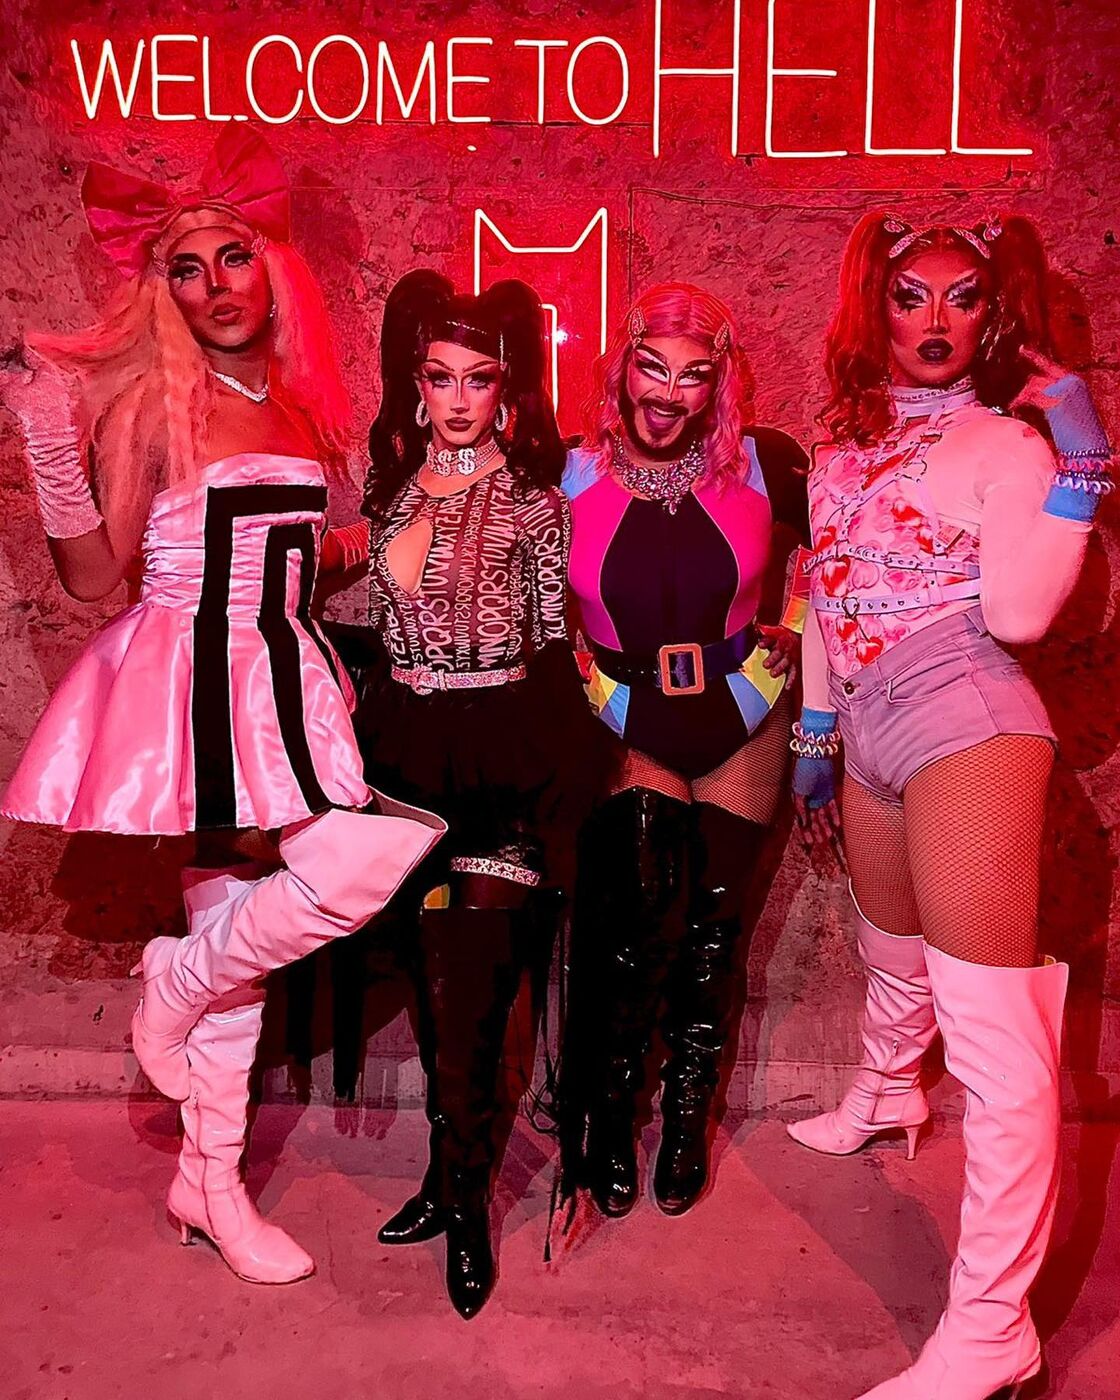 Four sassy drag queens pose in front of a sign that reads "Welcome to Hell" at DIX bar.